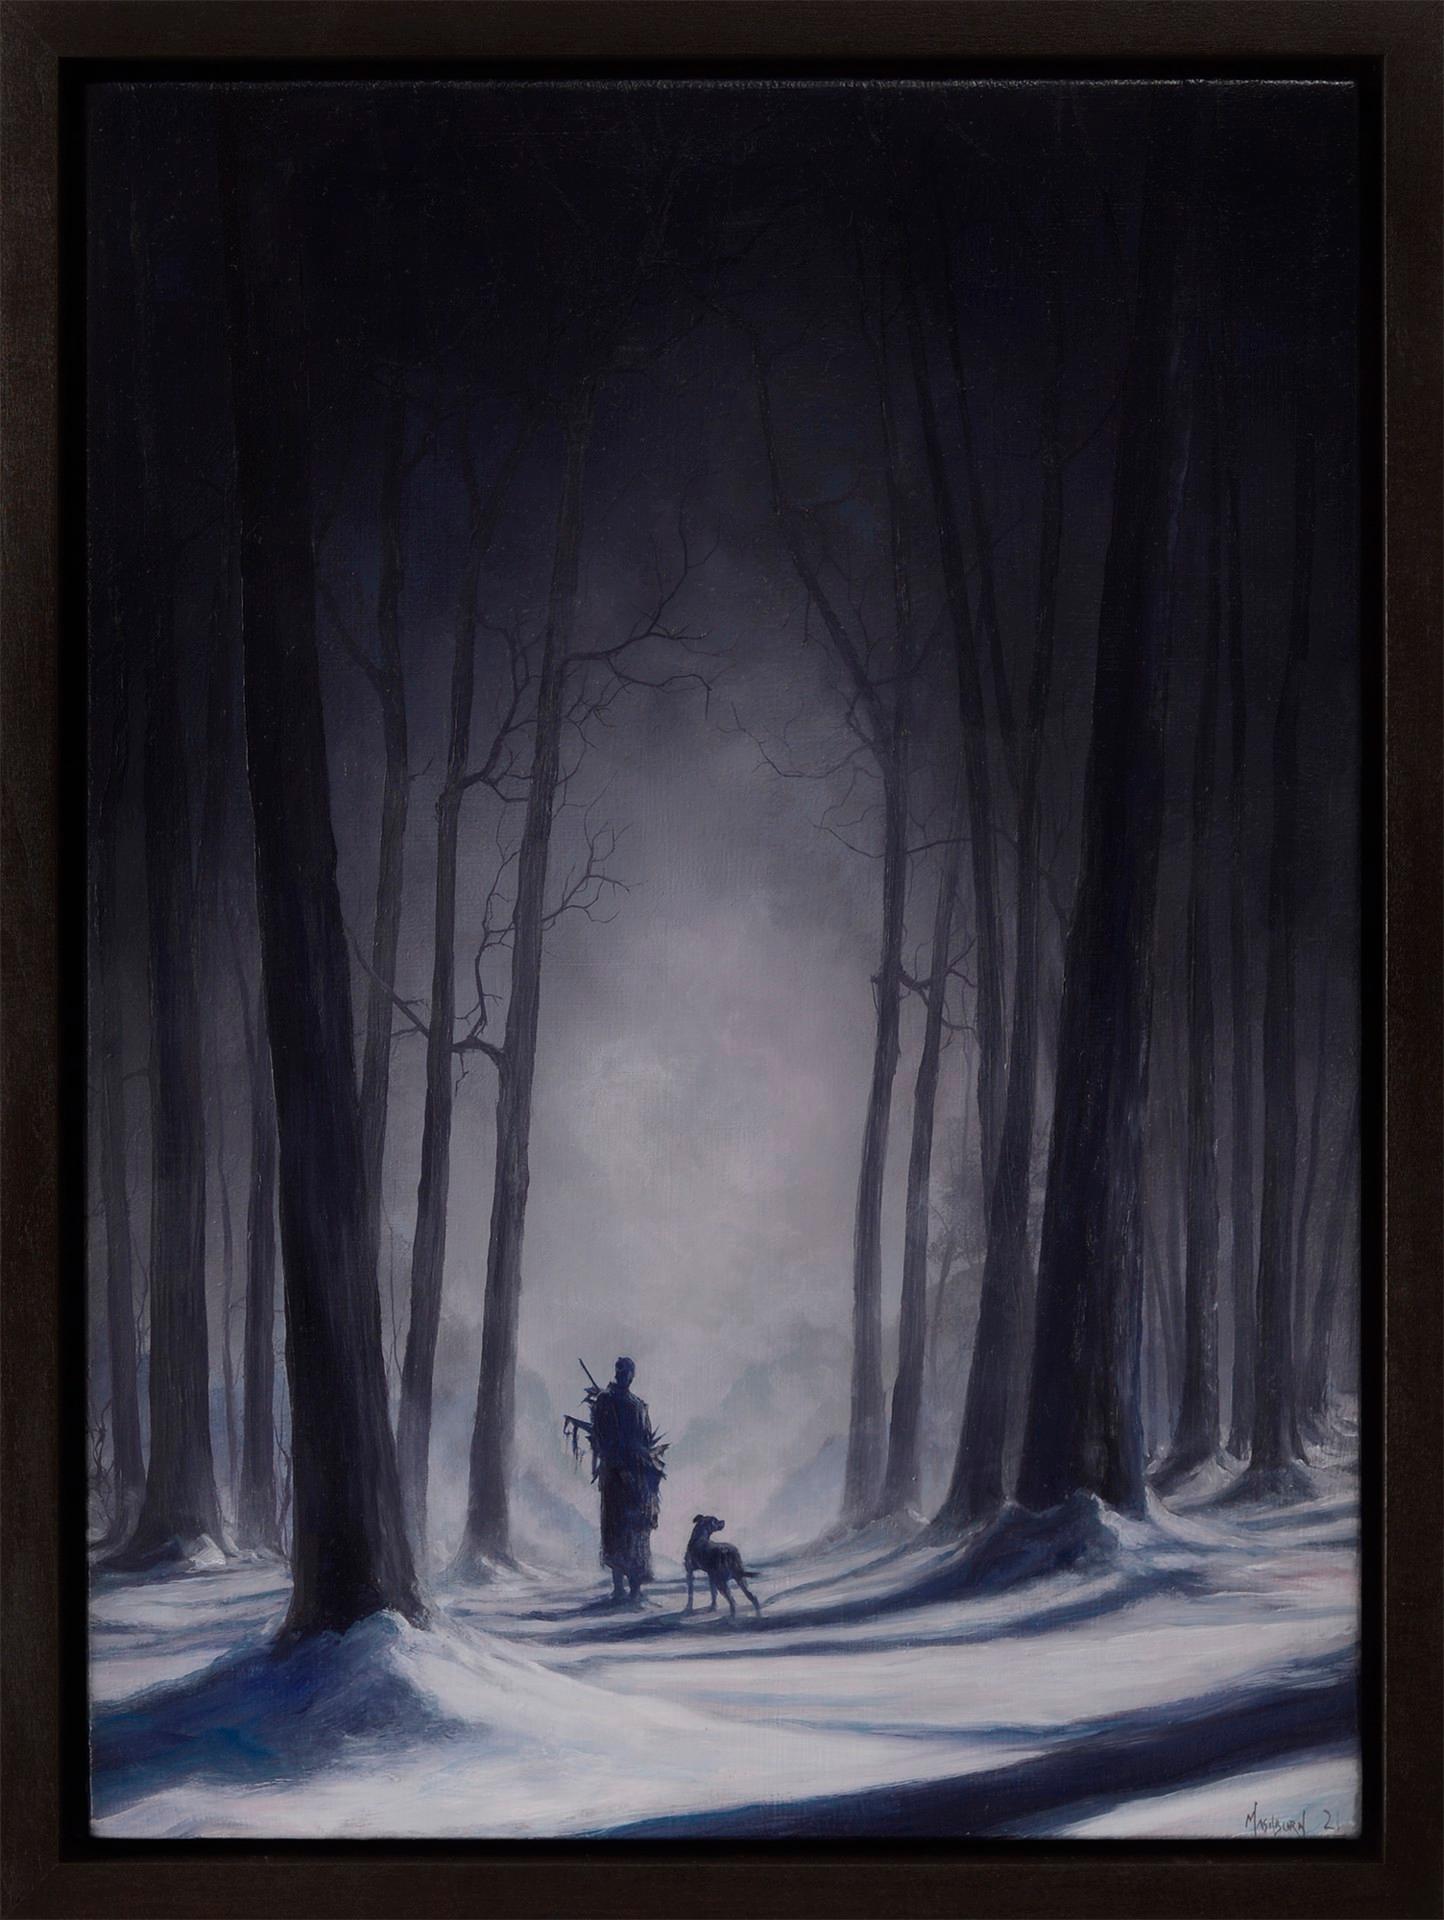 Boy with Dog in the Forest at Night - Painting by Brian Mashburn